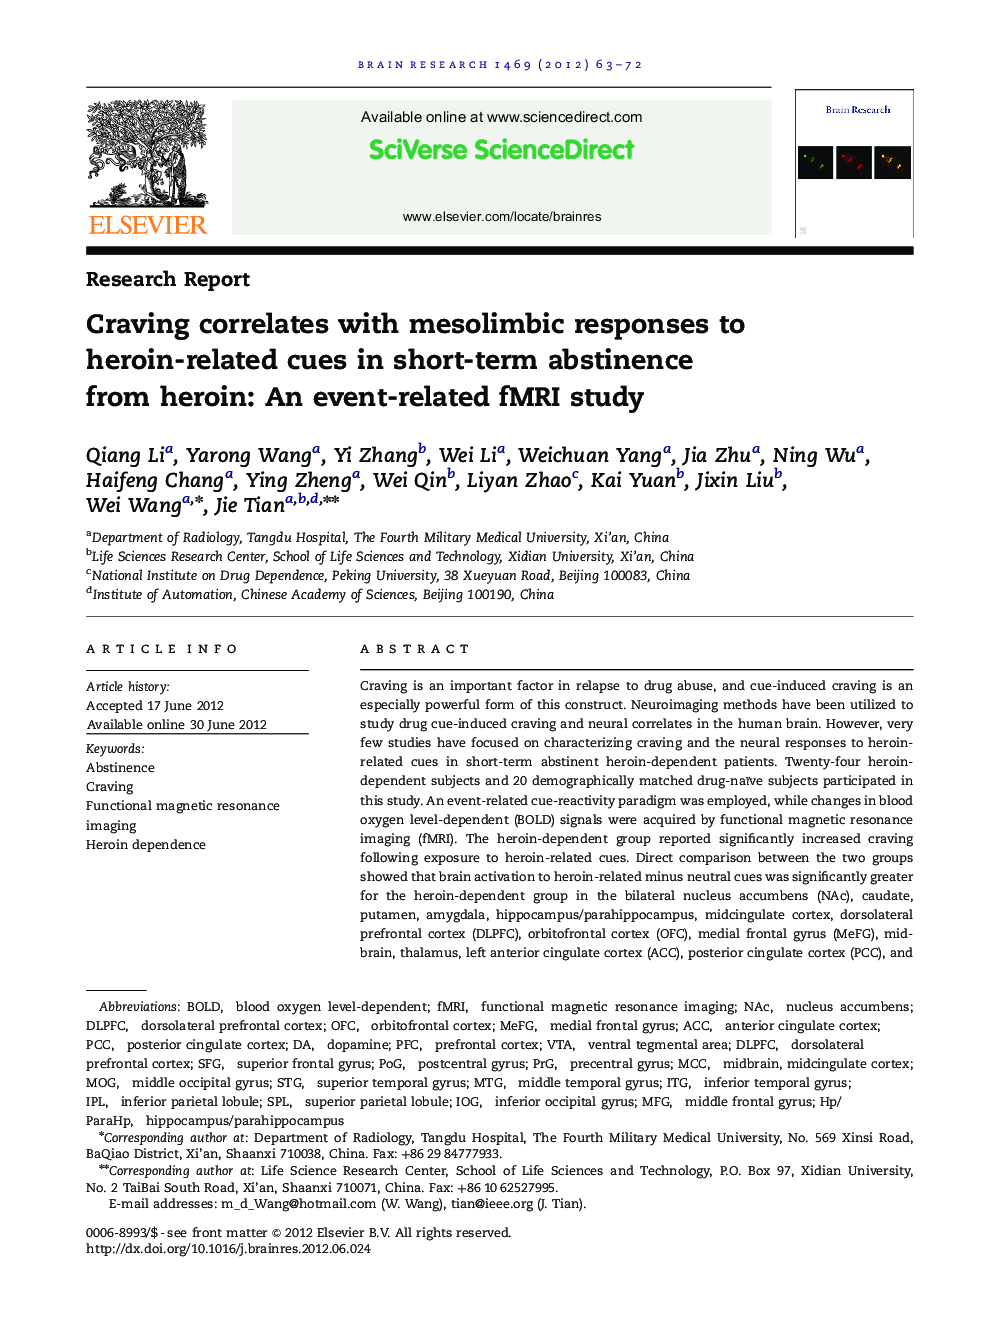 Craving correlates with mesolimbic responses to heroin-related cues in short-term abstinence from heroin: An event-related fMRI study